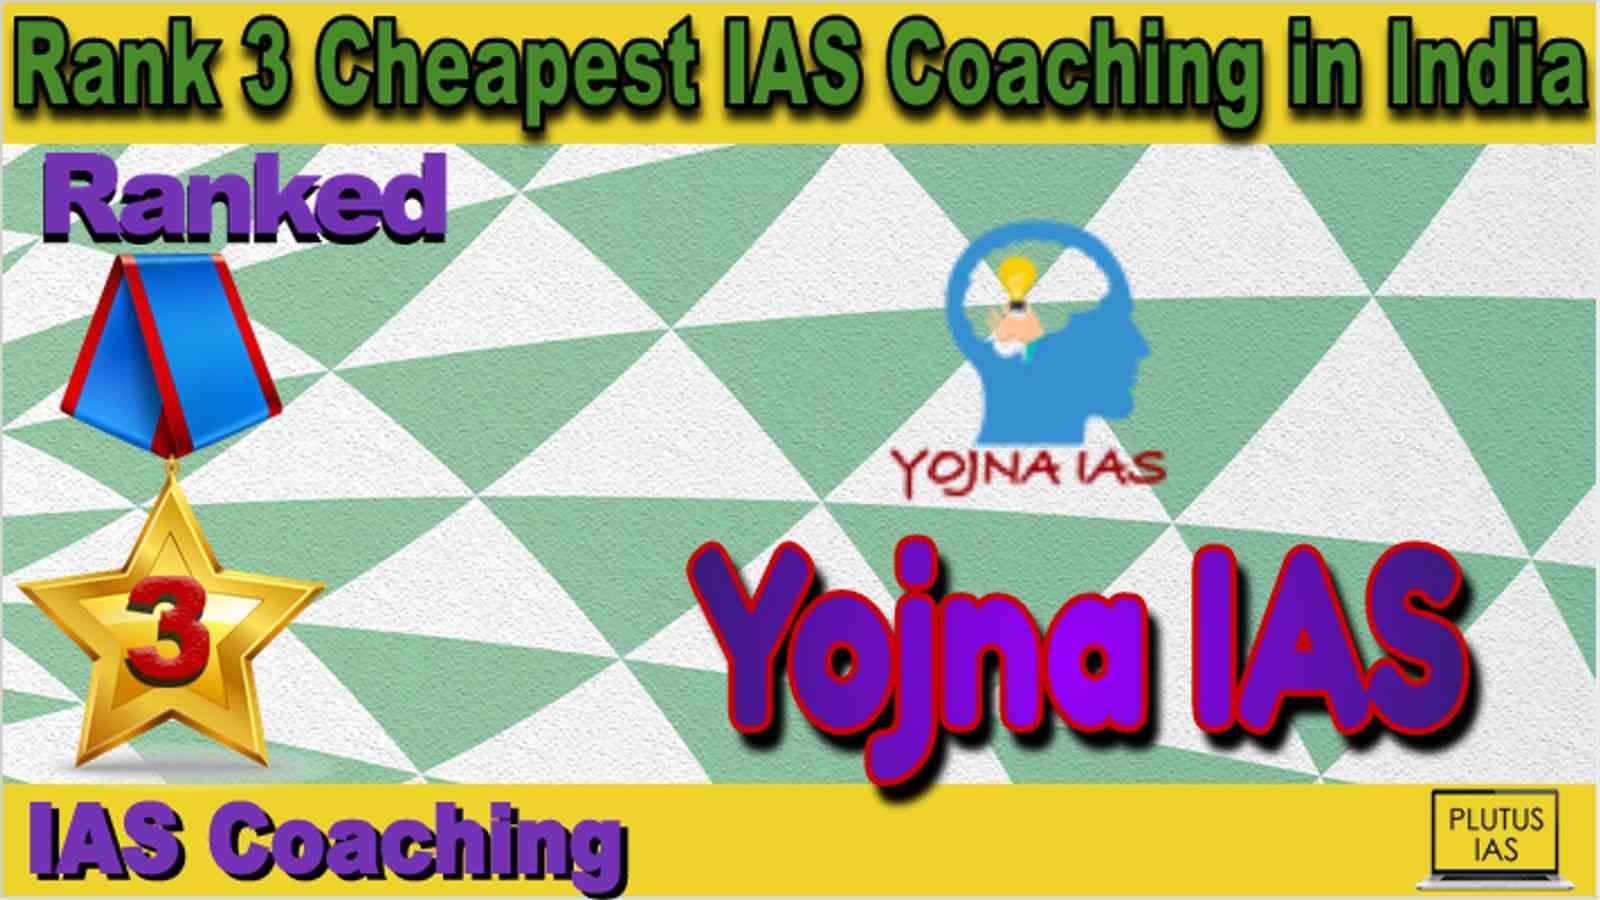 Rank 3 Cheapest IAS Coaching in India